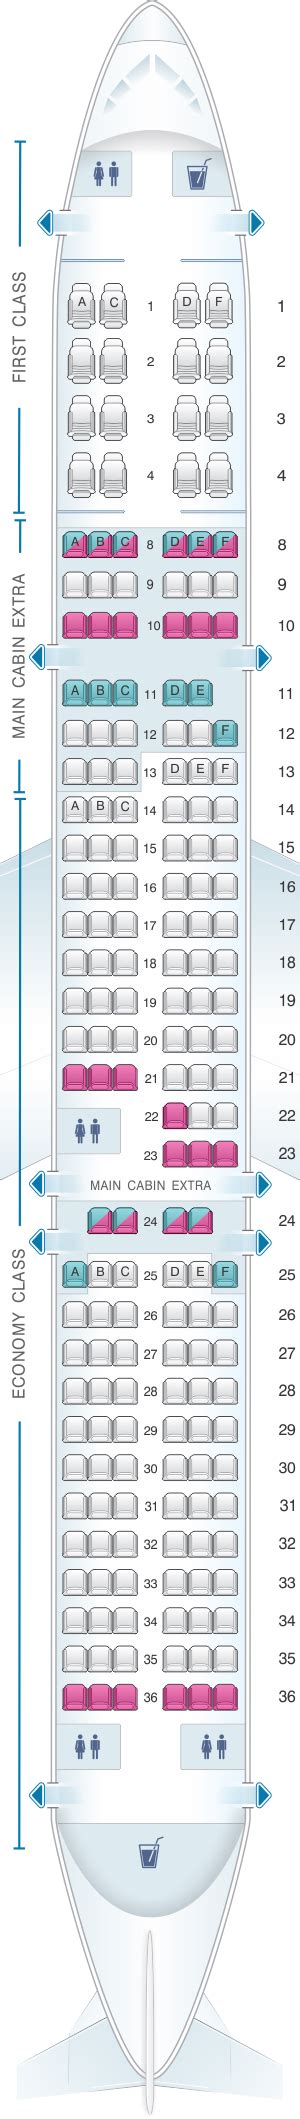 Seat Map American Airlines Airbus A321 181pax Seatmaestro